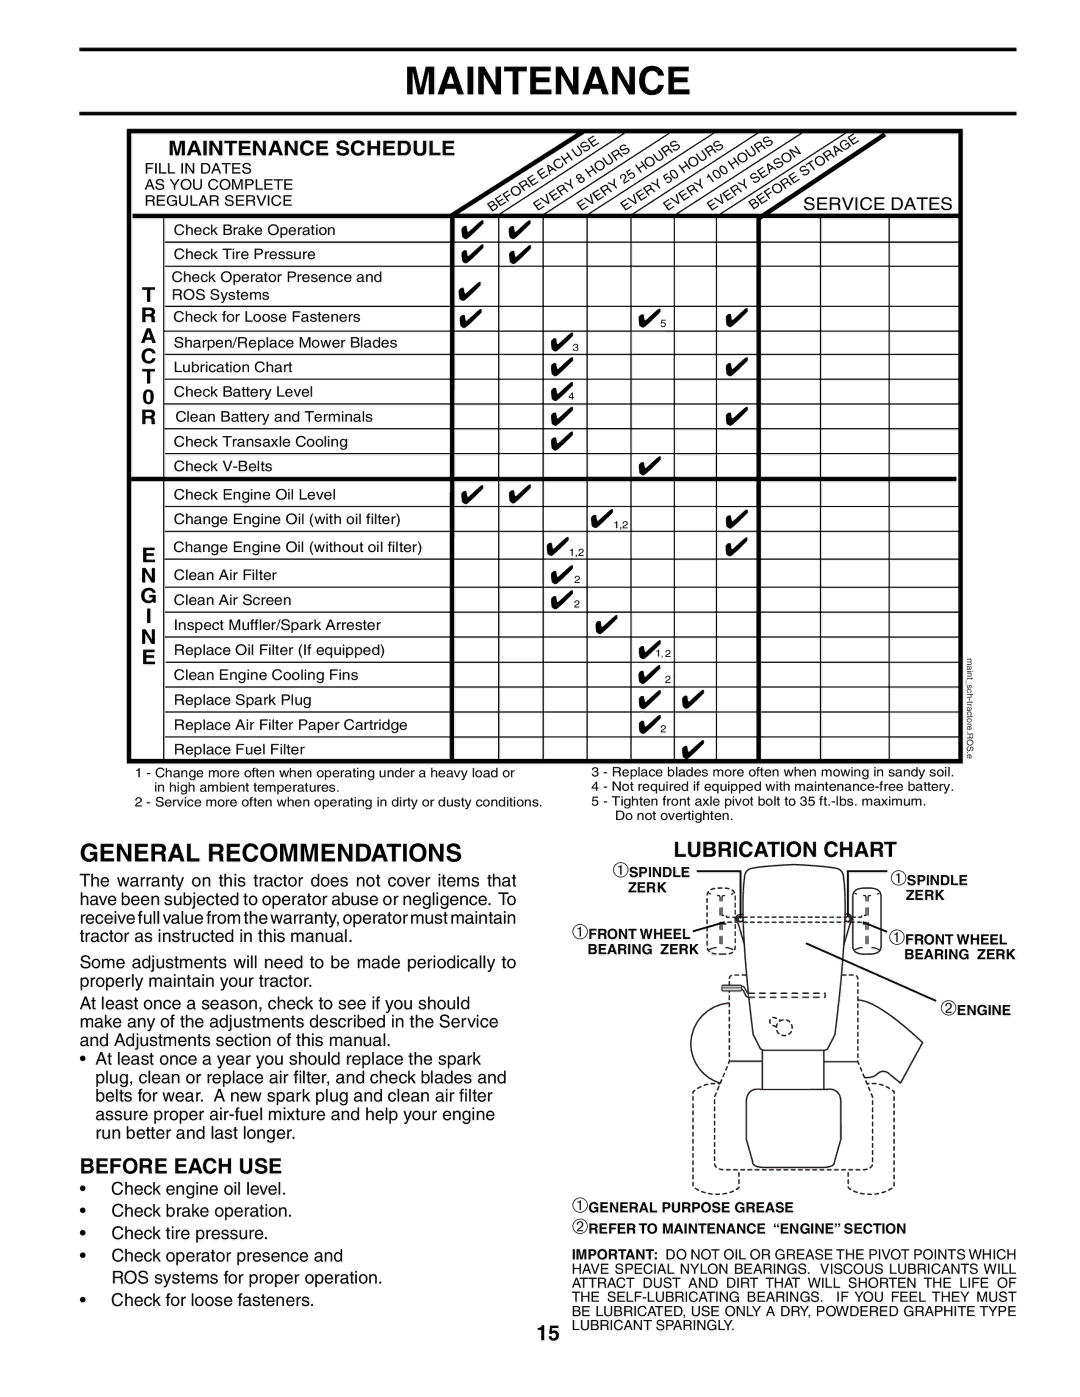 Poulan 197022 manual Maintenance, General Recommendations, Before Each USE, Lubrication Chart, Service Dates 